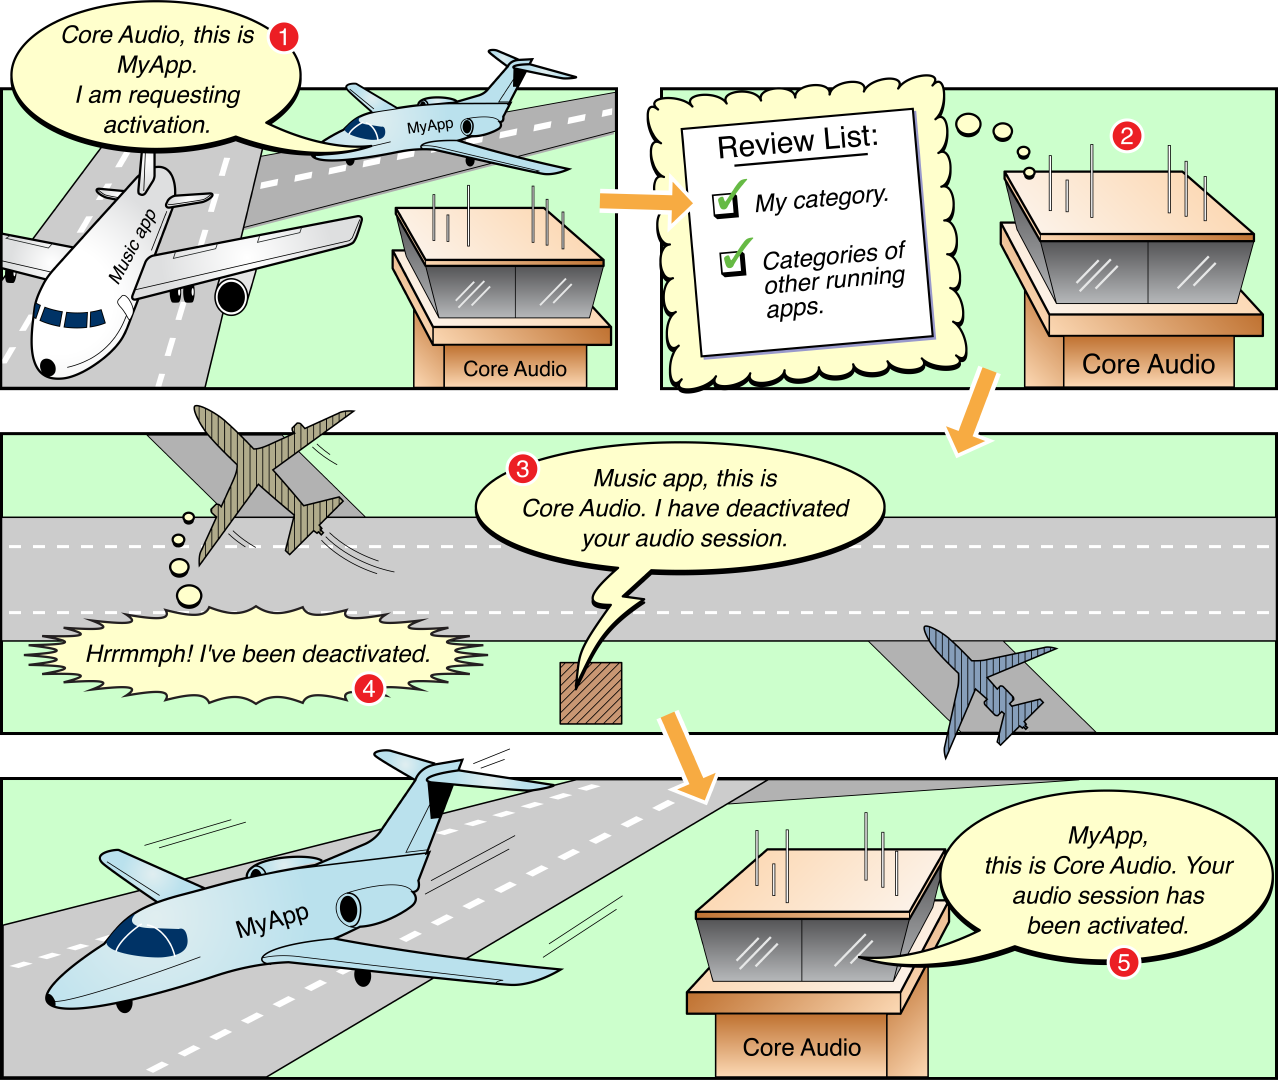 A comic-book representation of the sequence of events surrounding the activation of an audio session.